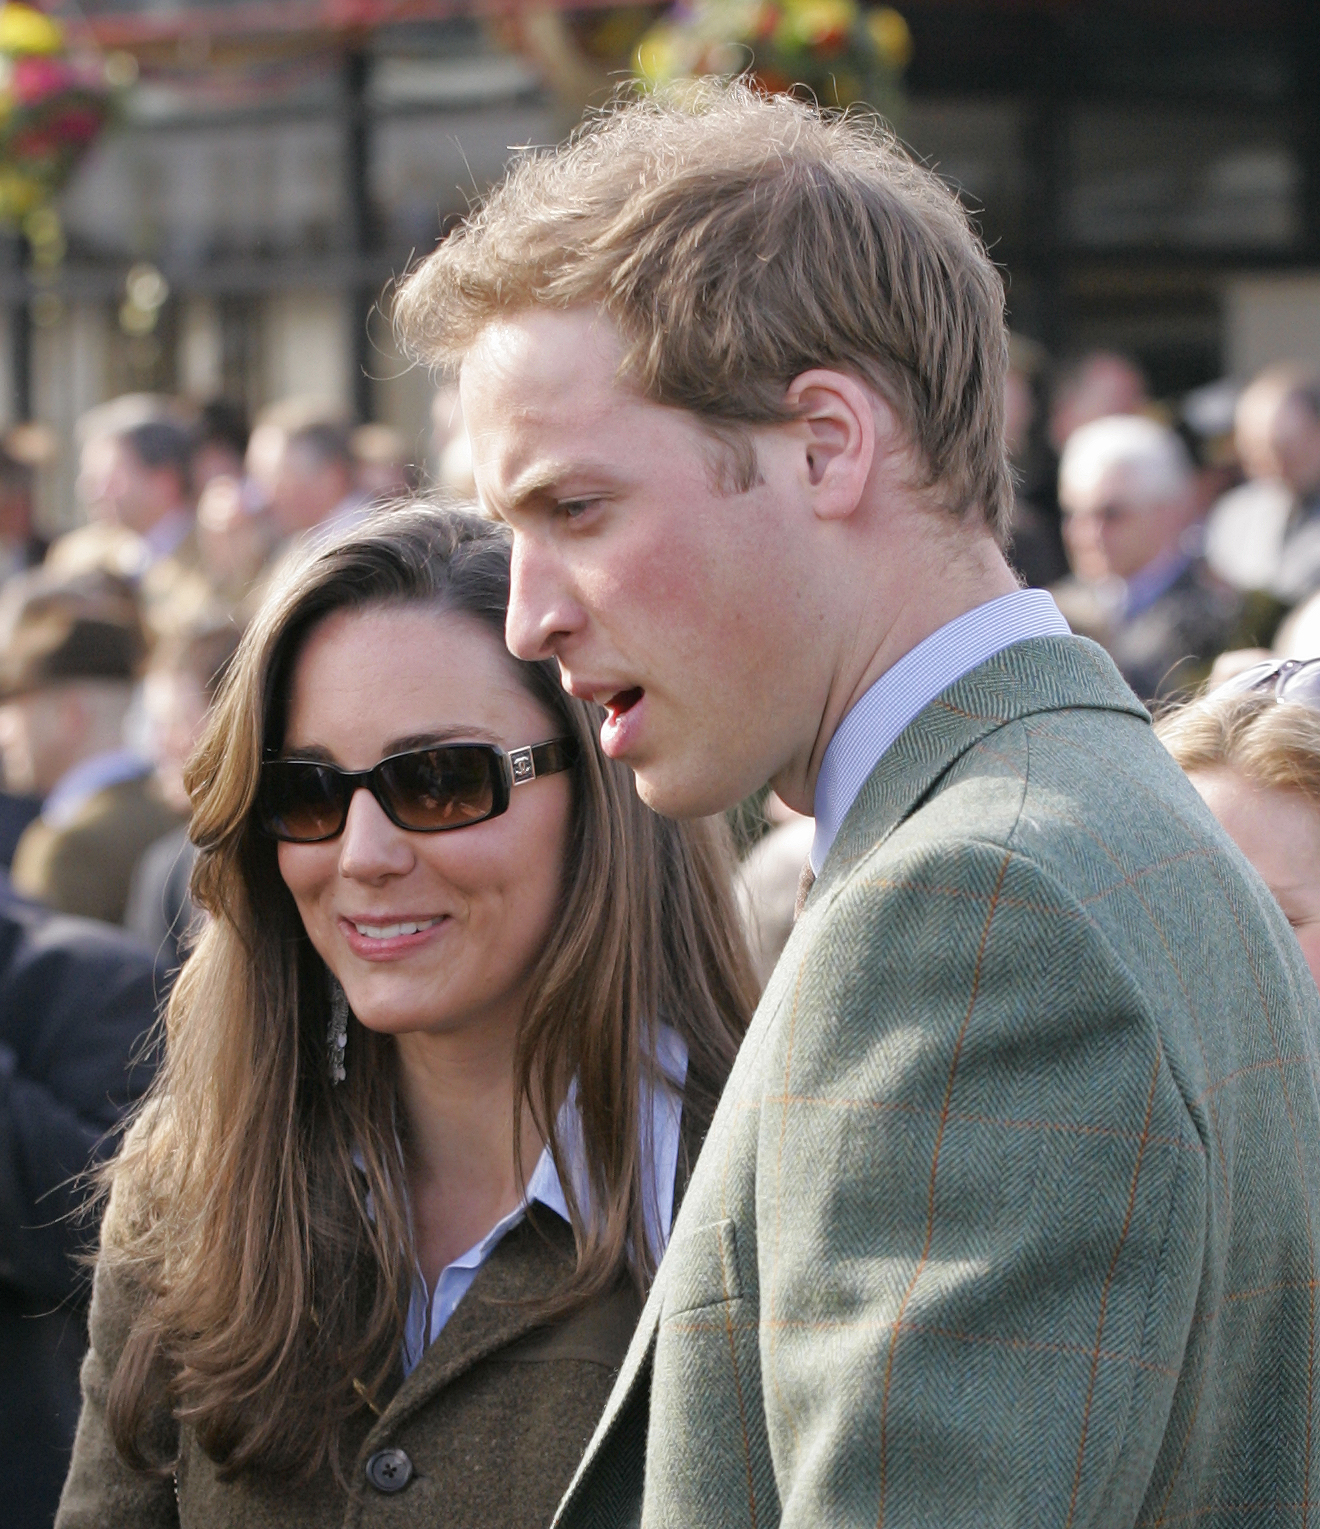 Kate Middleton and Prince William attend day 1 of the Cheltenham Horse Racing Festival on March 13, 2007 in Cheltenham, England. | Source: Getty Images